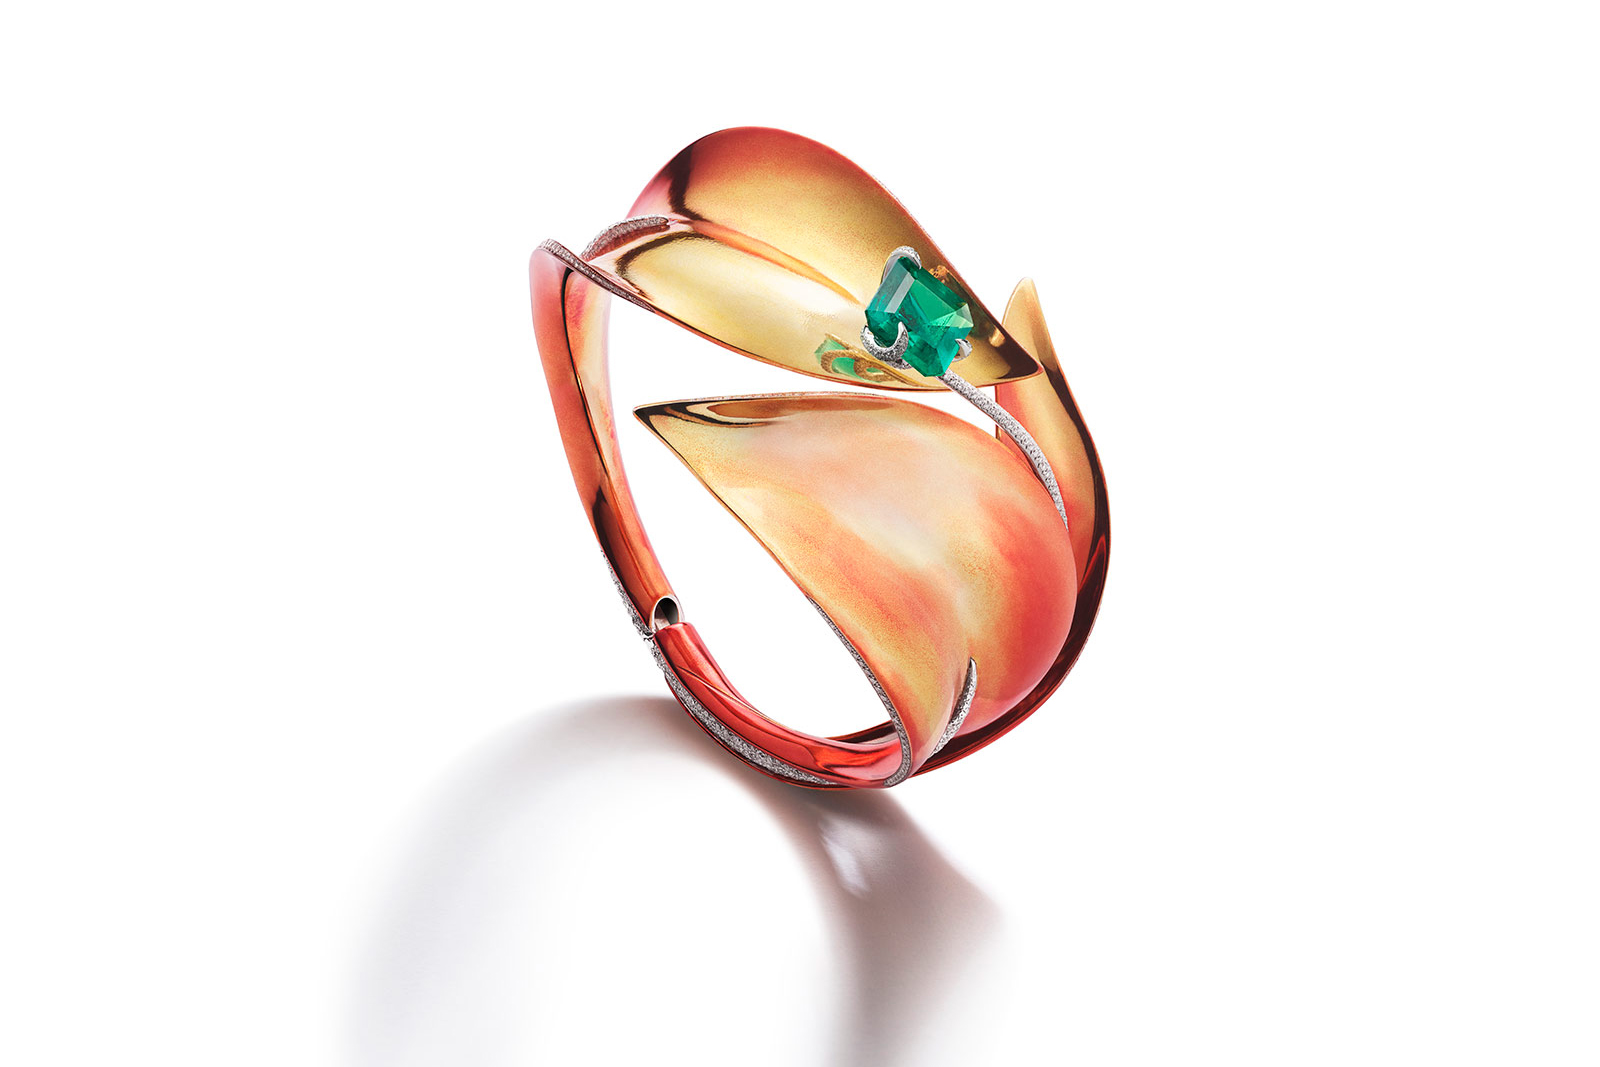 Feng J Sunset Lily of the Valley bangle with a 3.24 carat Colombian emerald, white diamonds and brush-painted electroplated gold